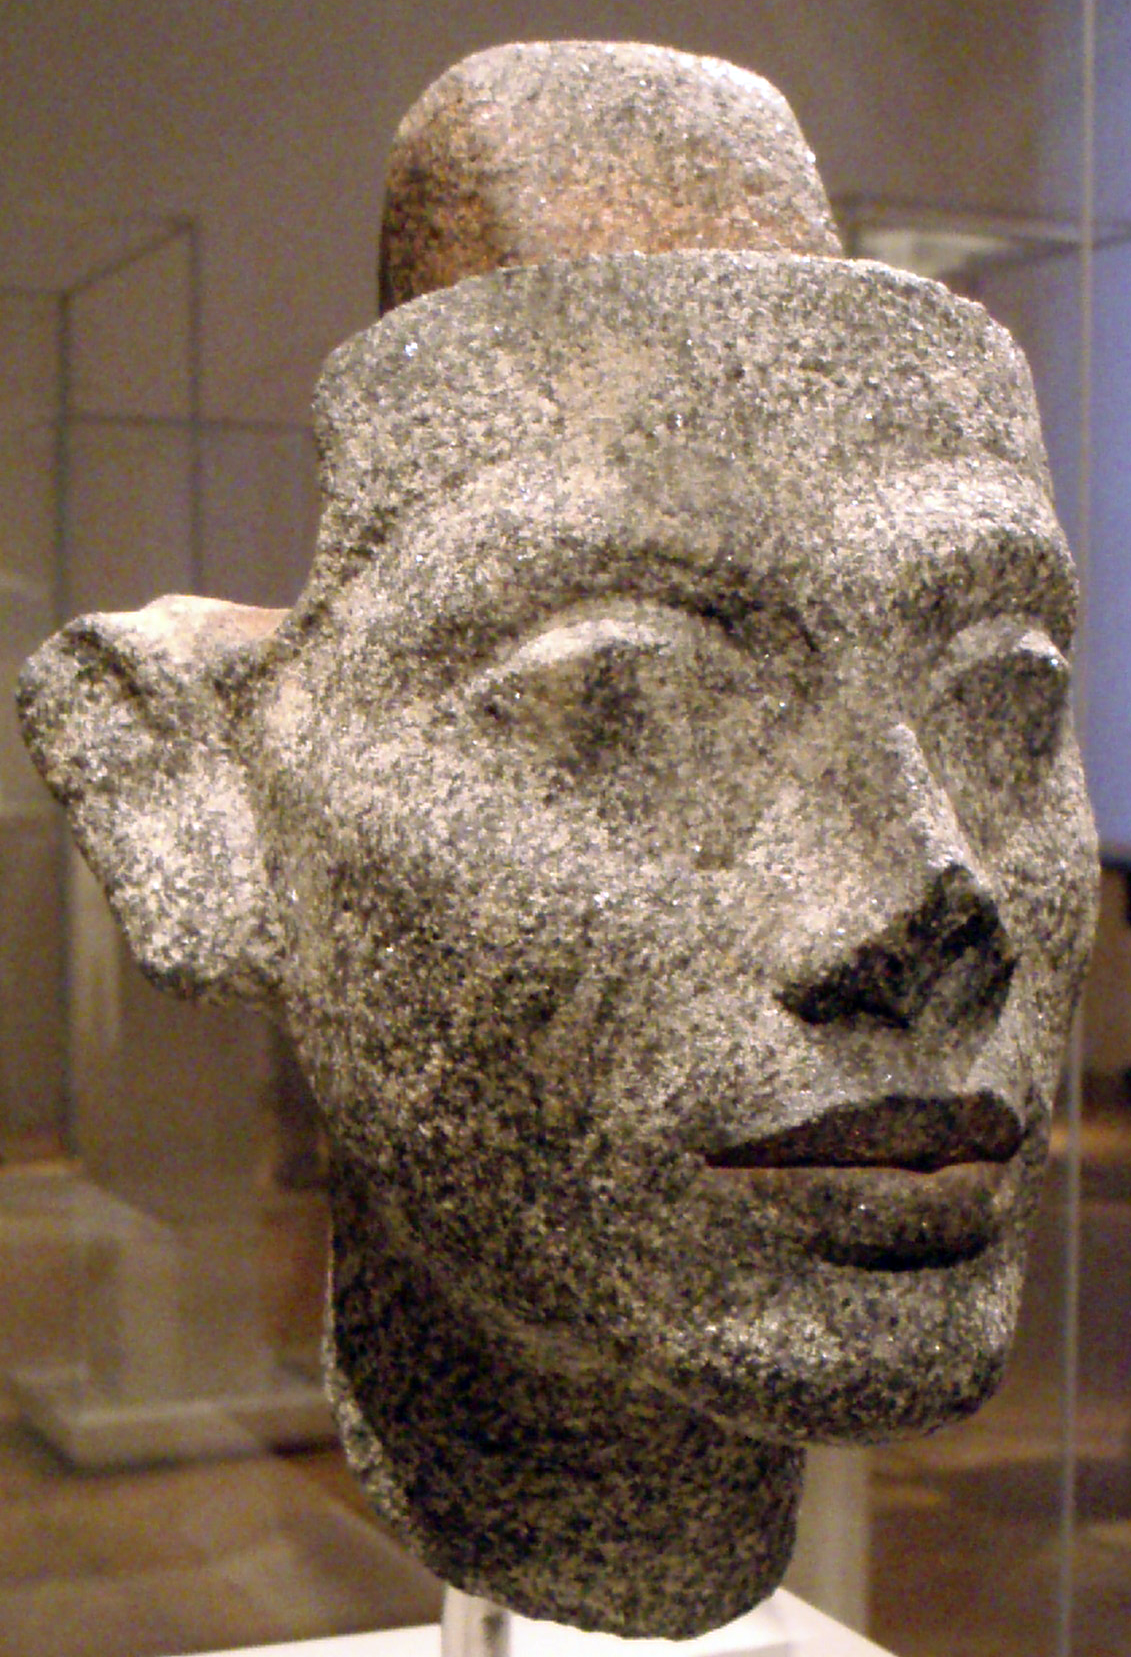 Granite statue of the head of Queen Nefertiti, from the workshop of the sculptor Thutmose. On display at the Ägyptisches Museum.